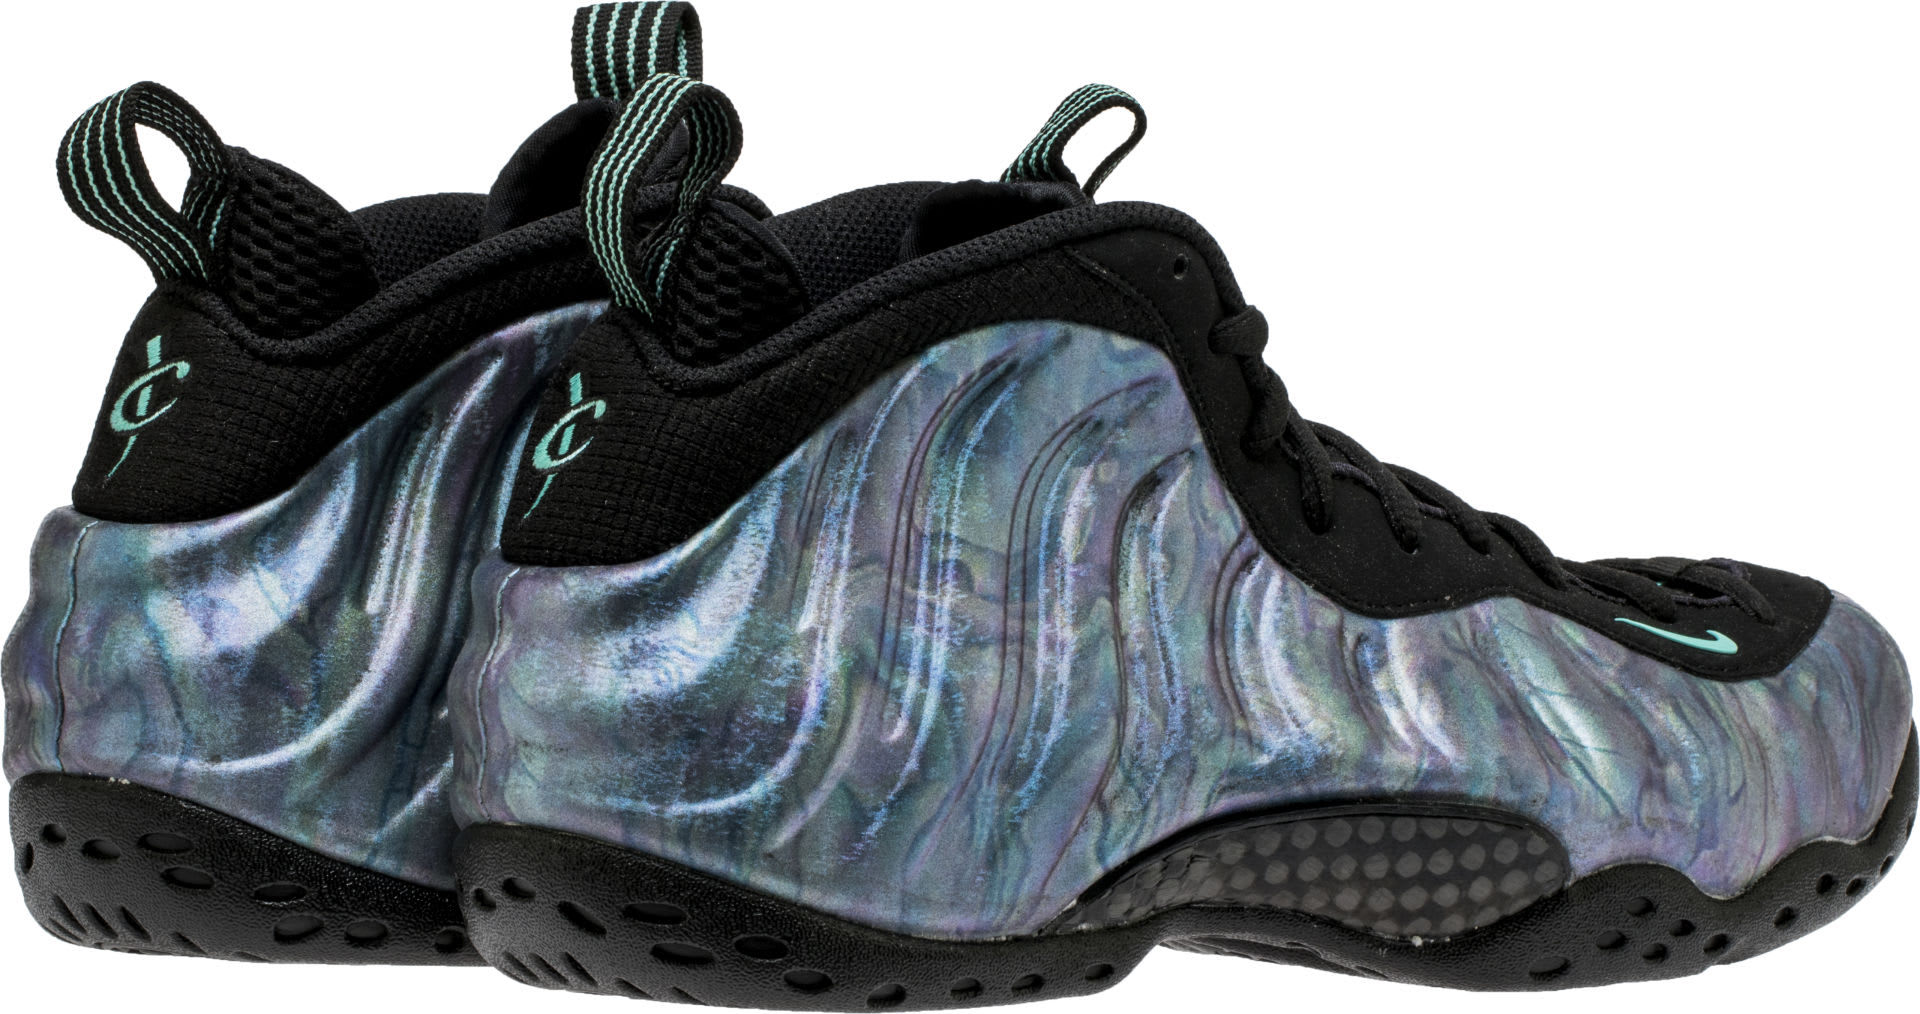 Nike Air Foamposite One Abalone Release Date 575420-009 Back